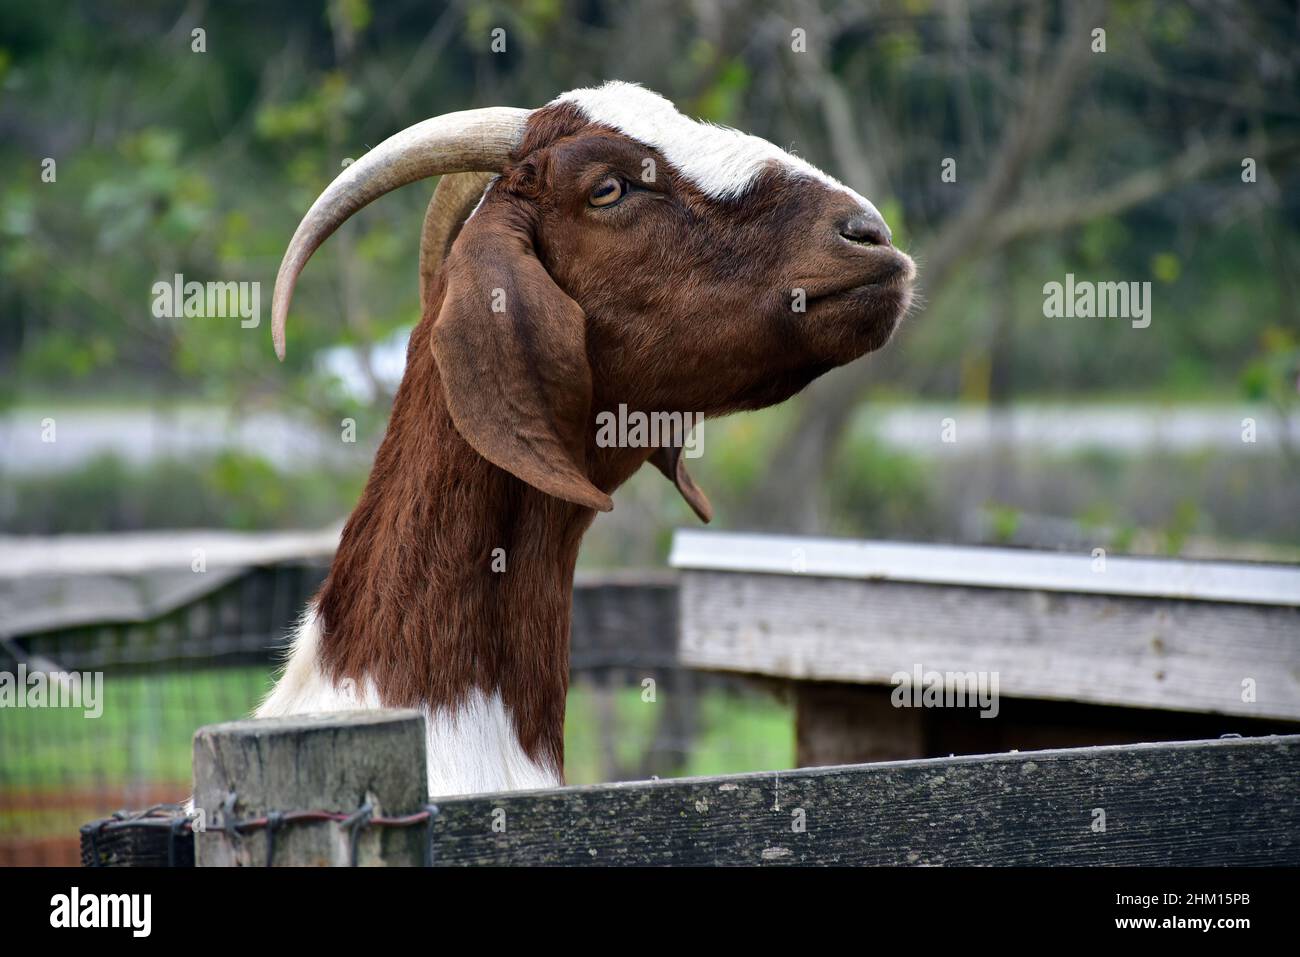 Brown and White Goat Head and Neck with Horns and Long Ears in a Wooden Pen Stock Photo